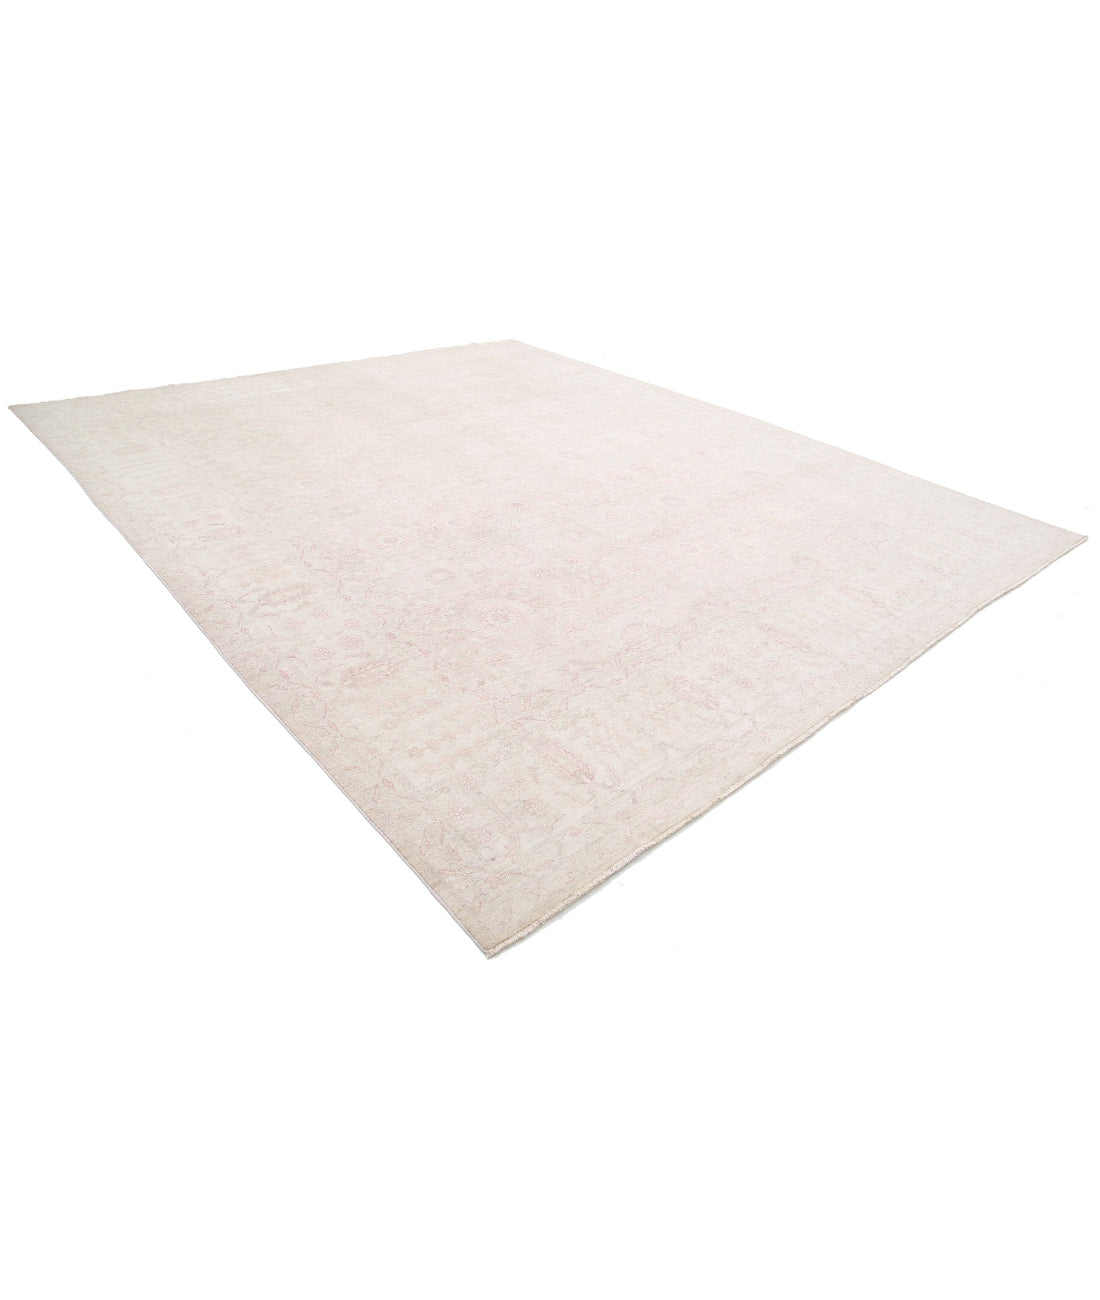 Serenity 12'0'' X 14'4'' Hand-Knotted Wool Rug 12'0'' x 14'4'' (360 X 430) / Taupe / Ivory